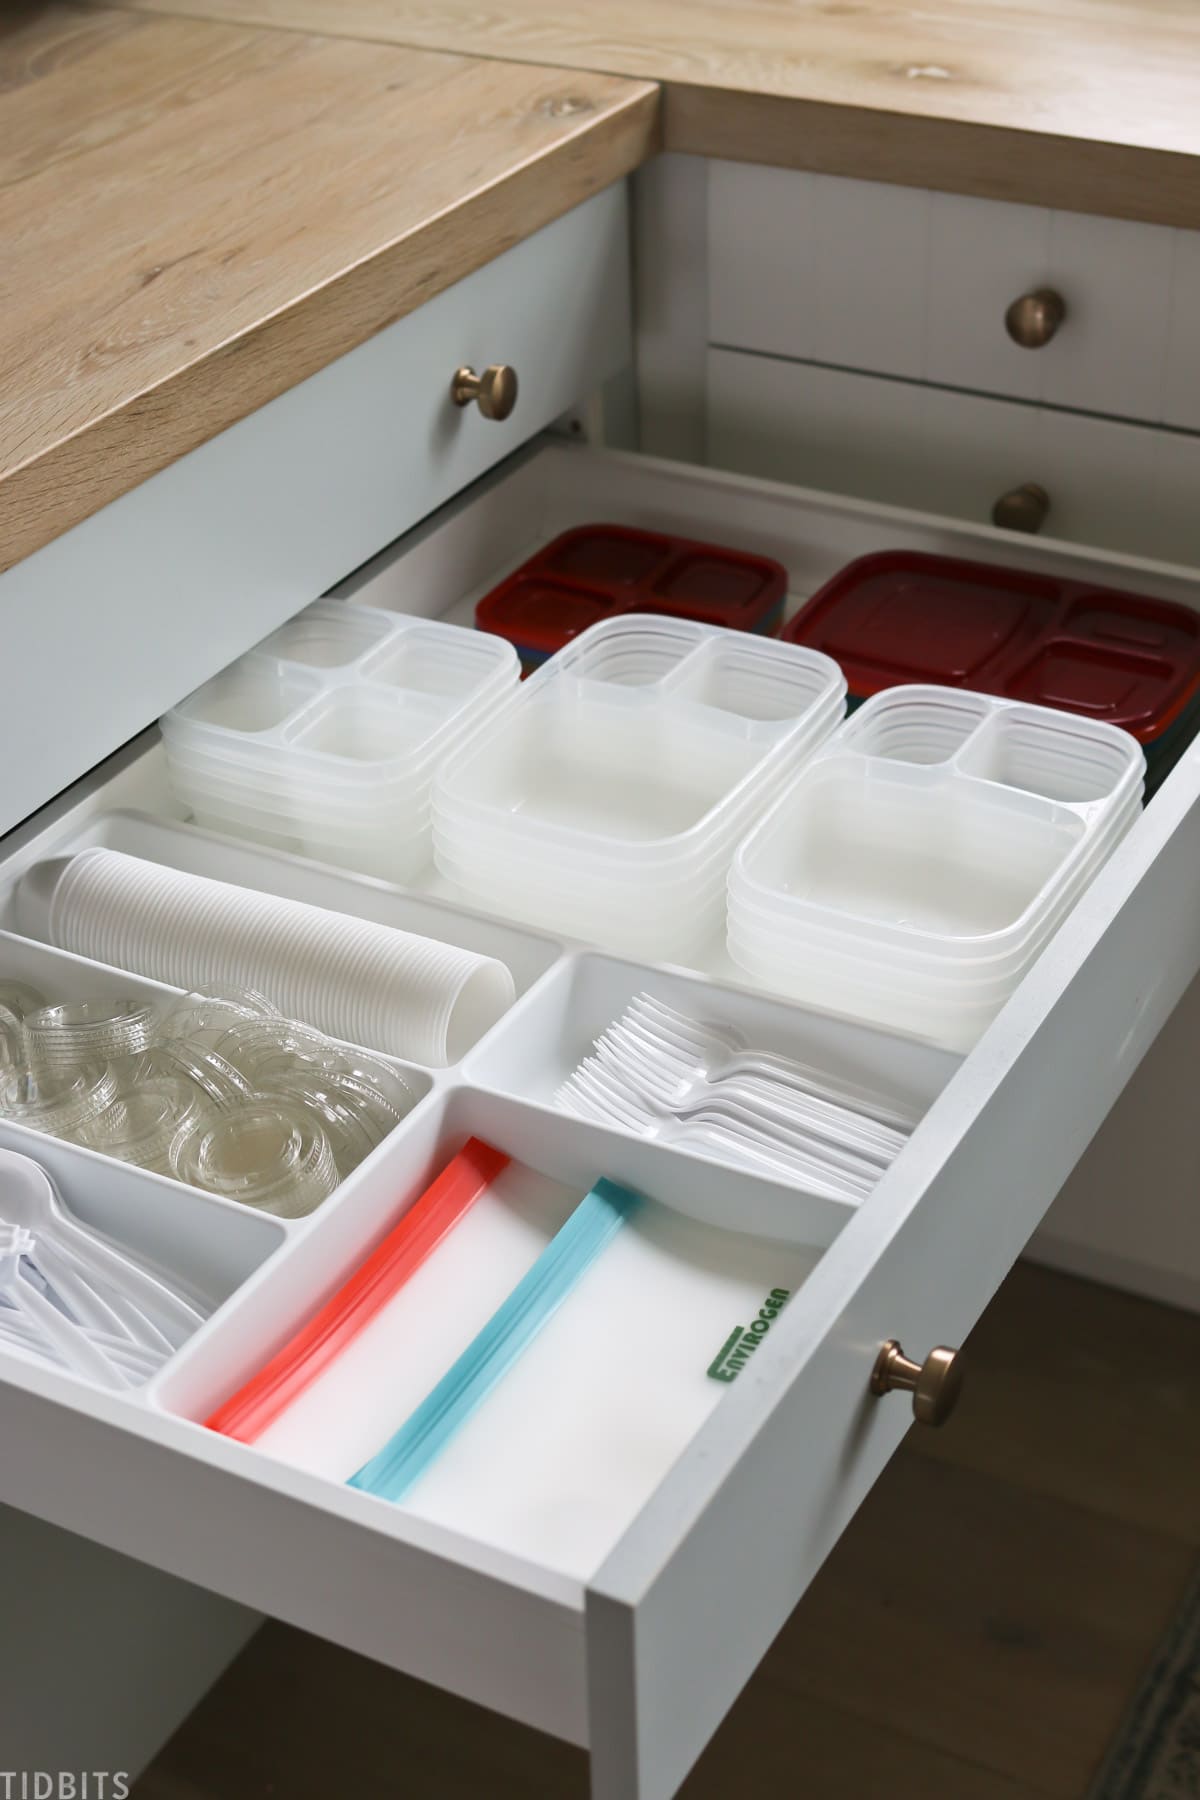 plaster containers, lids, plastic silverware, ziplock bags, and small containers organized in a kitchen drawer